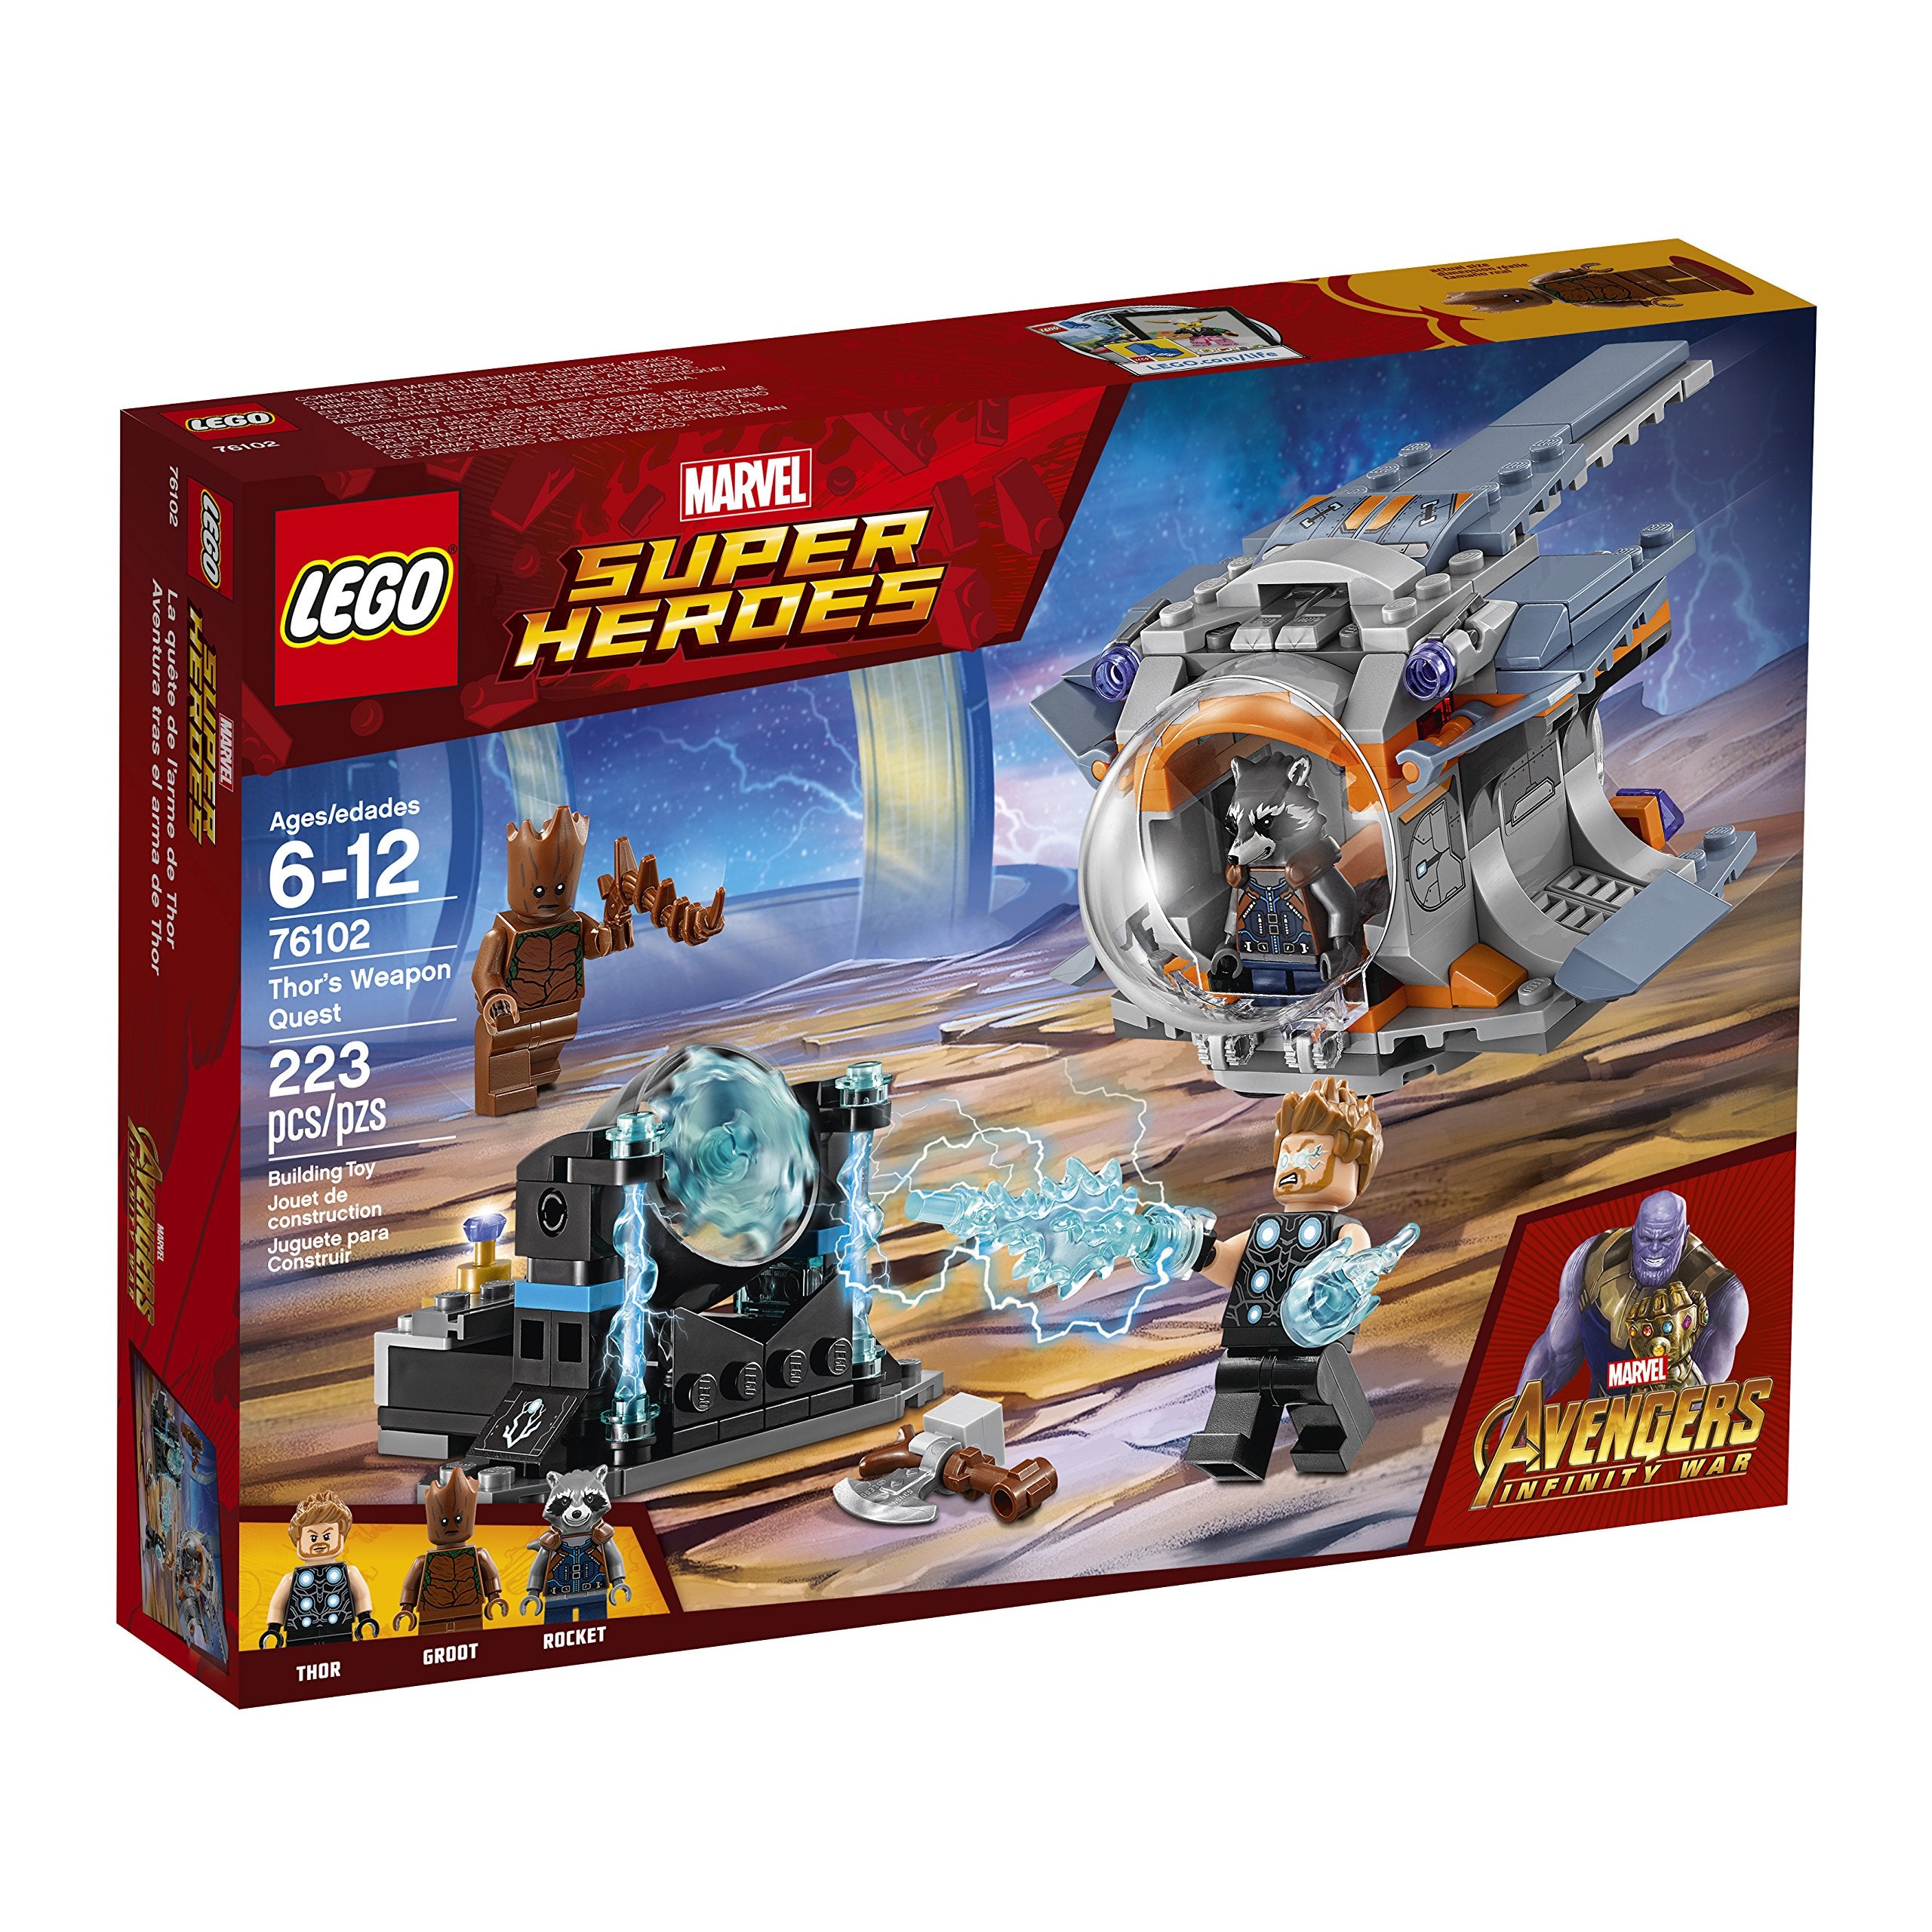 LEGO Marvel Super Heroes Avengers: Infinity War Thor’s Weapon Quest 76102 Building Kit (223 Piece)